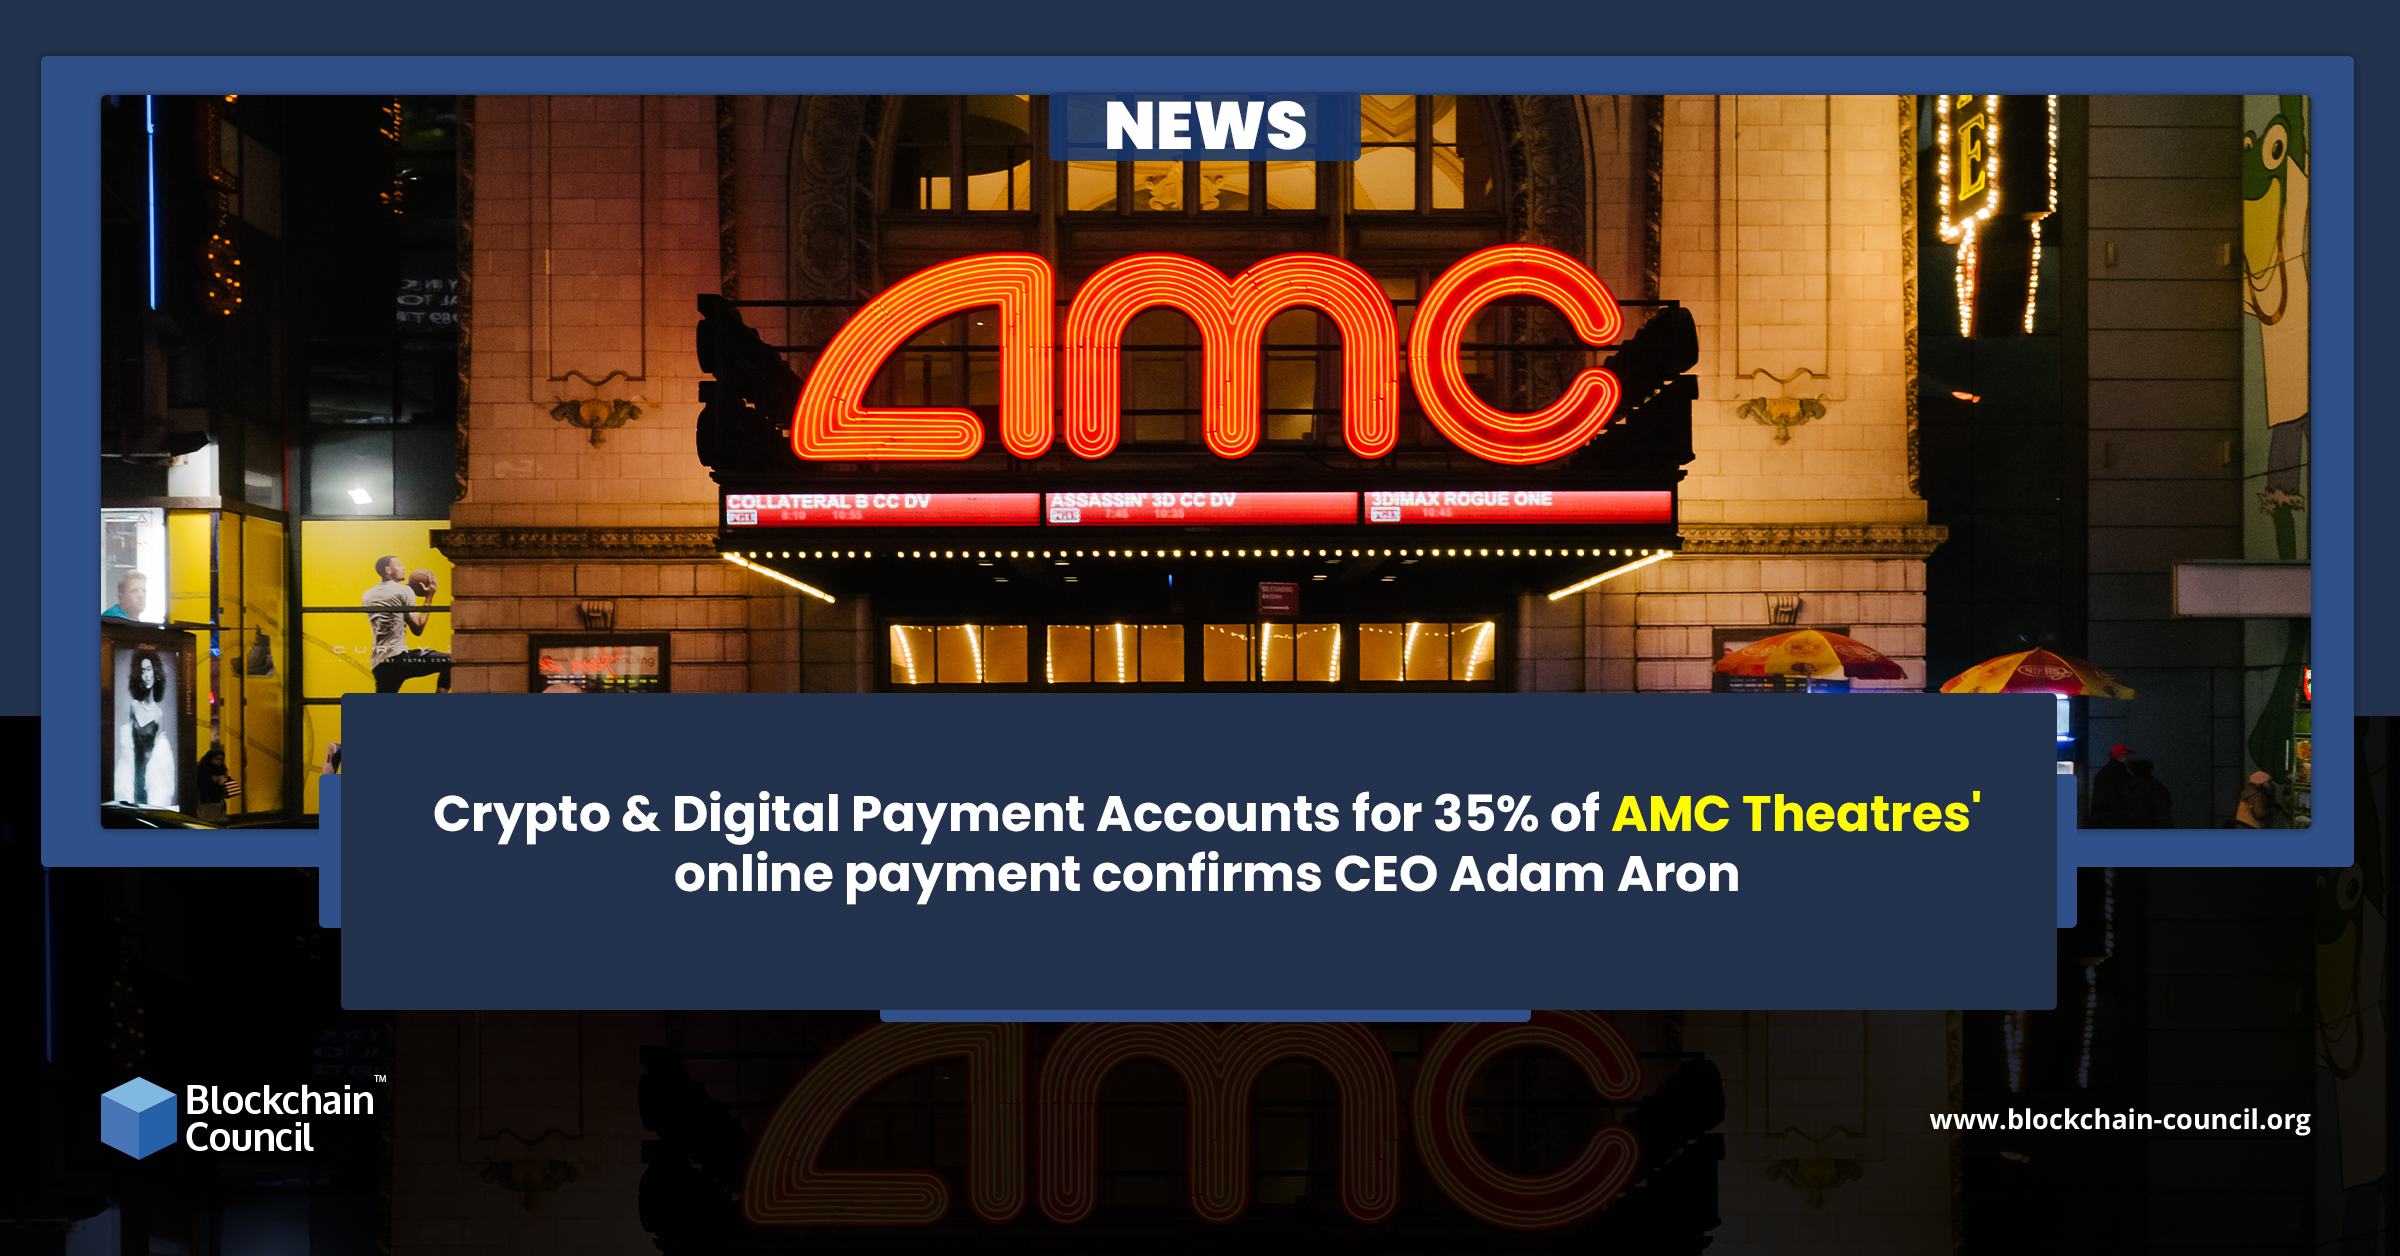 Crypto & Digital Payment Accounts for 35% of AMC Theatres' online payment confirms CEO Adam Aron